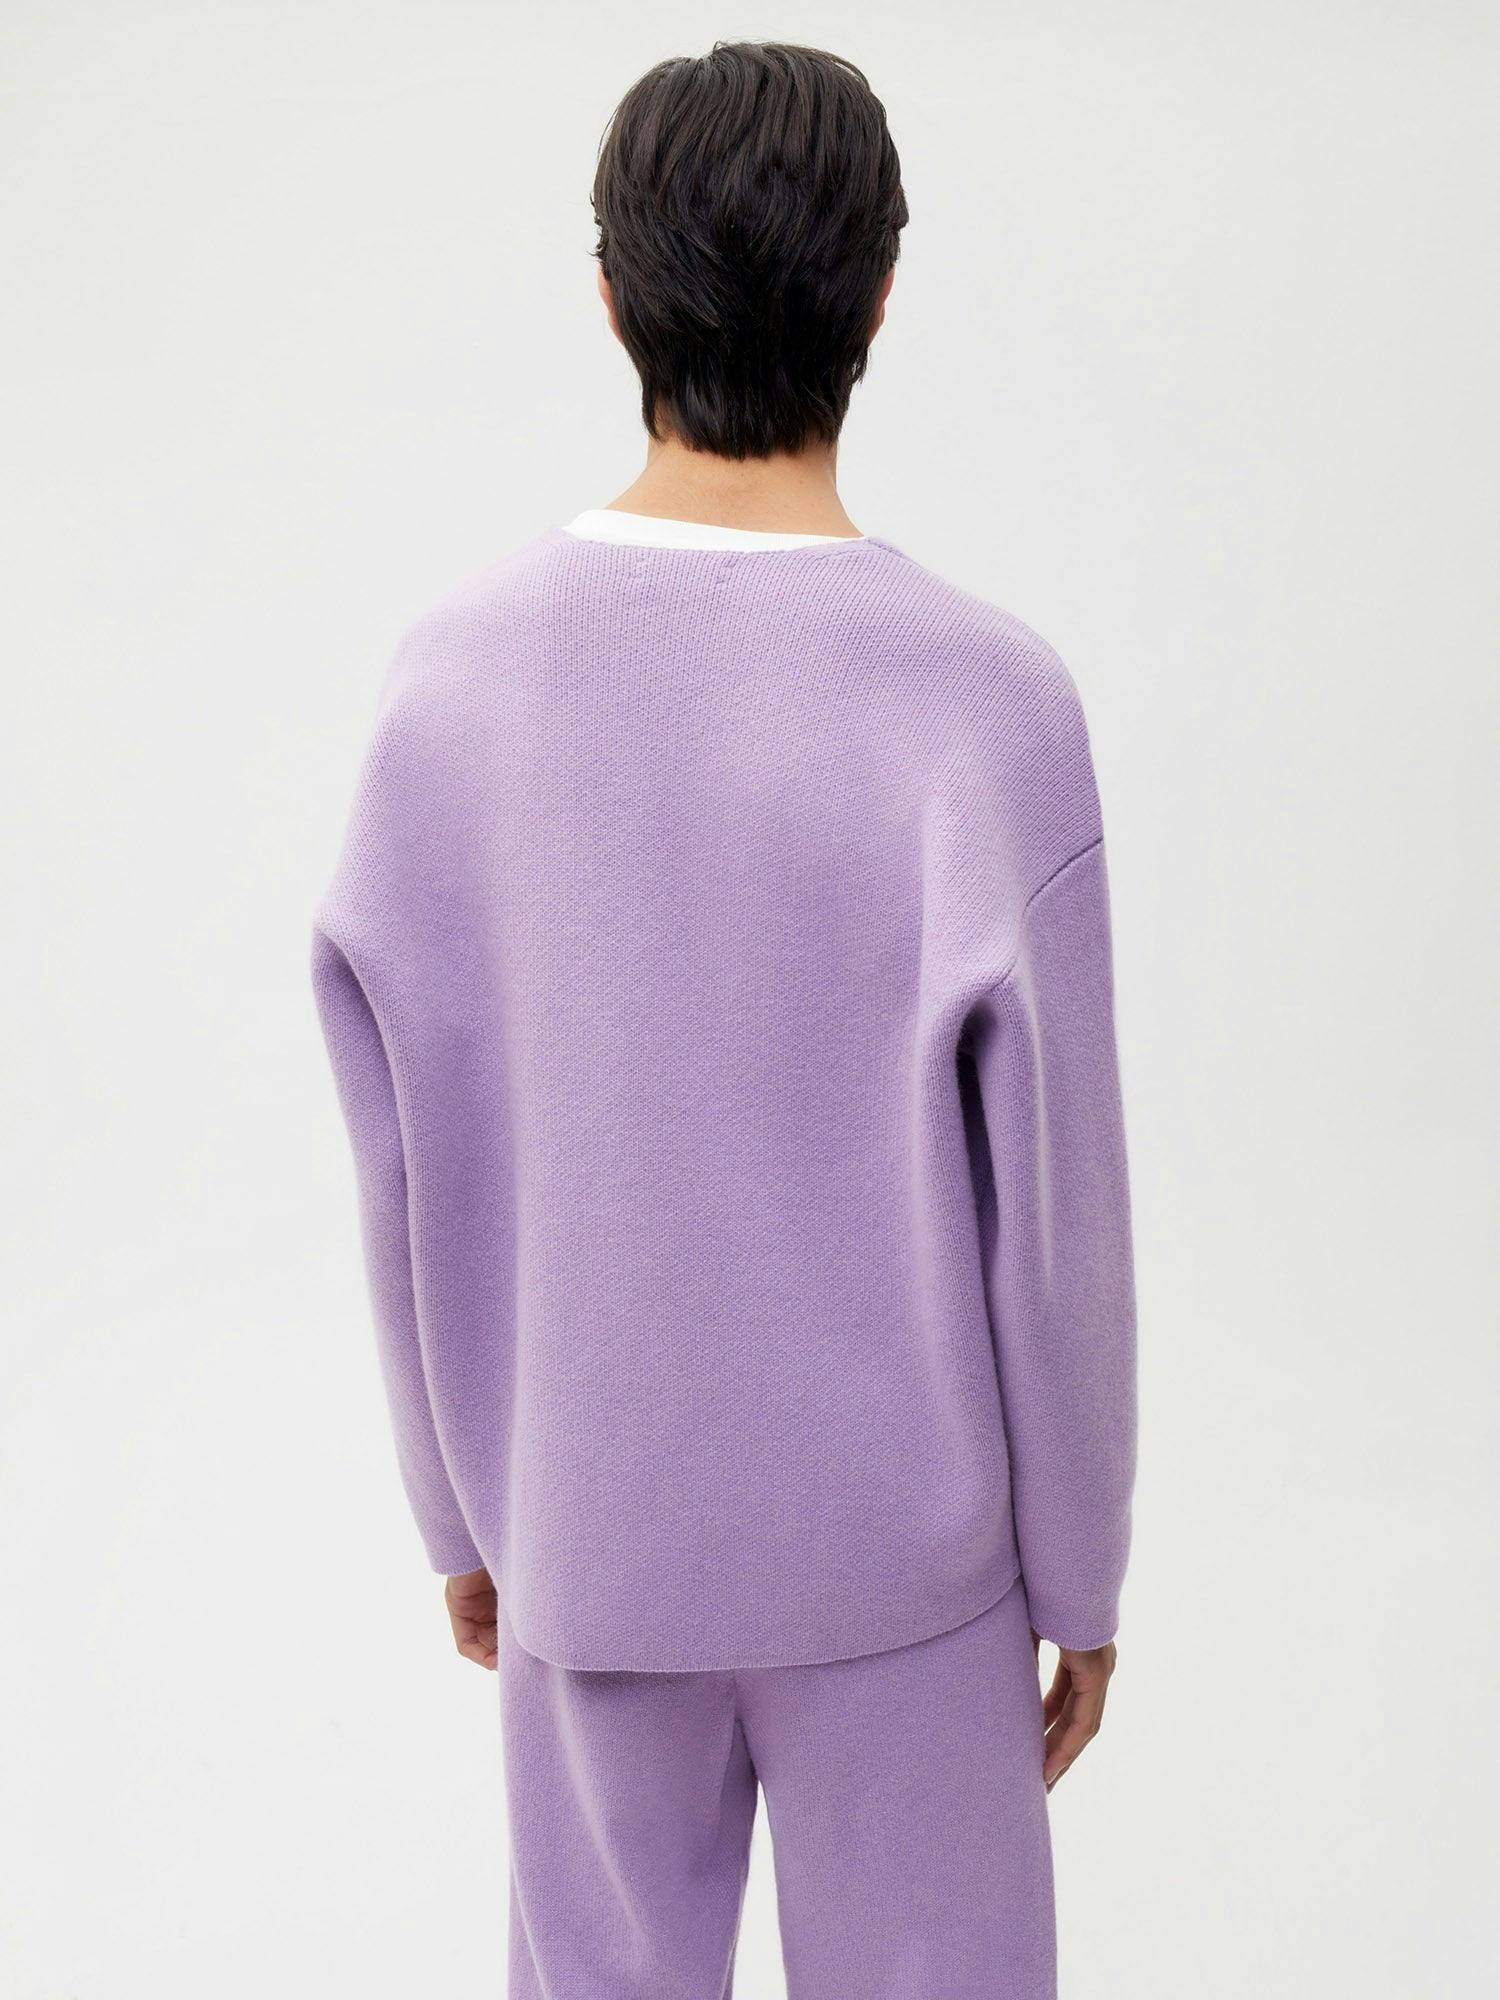 https://cdn.shopify.com/s/files/1/0035/1309/0115/products/Cashmere-Cardigan-Orchid-Purple-Male-2.jpg?v=1662476029